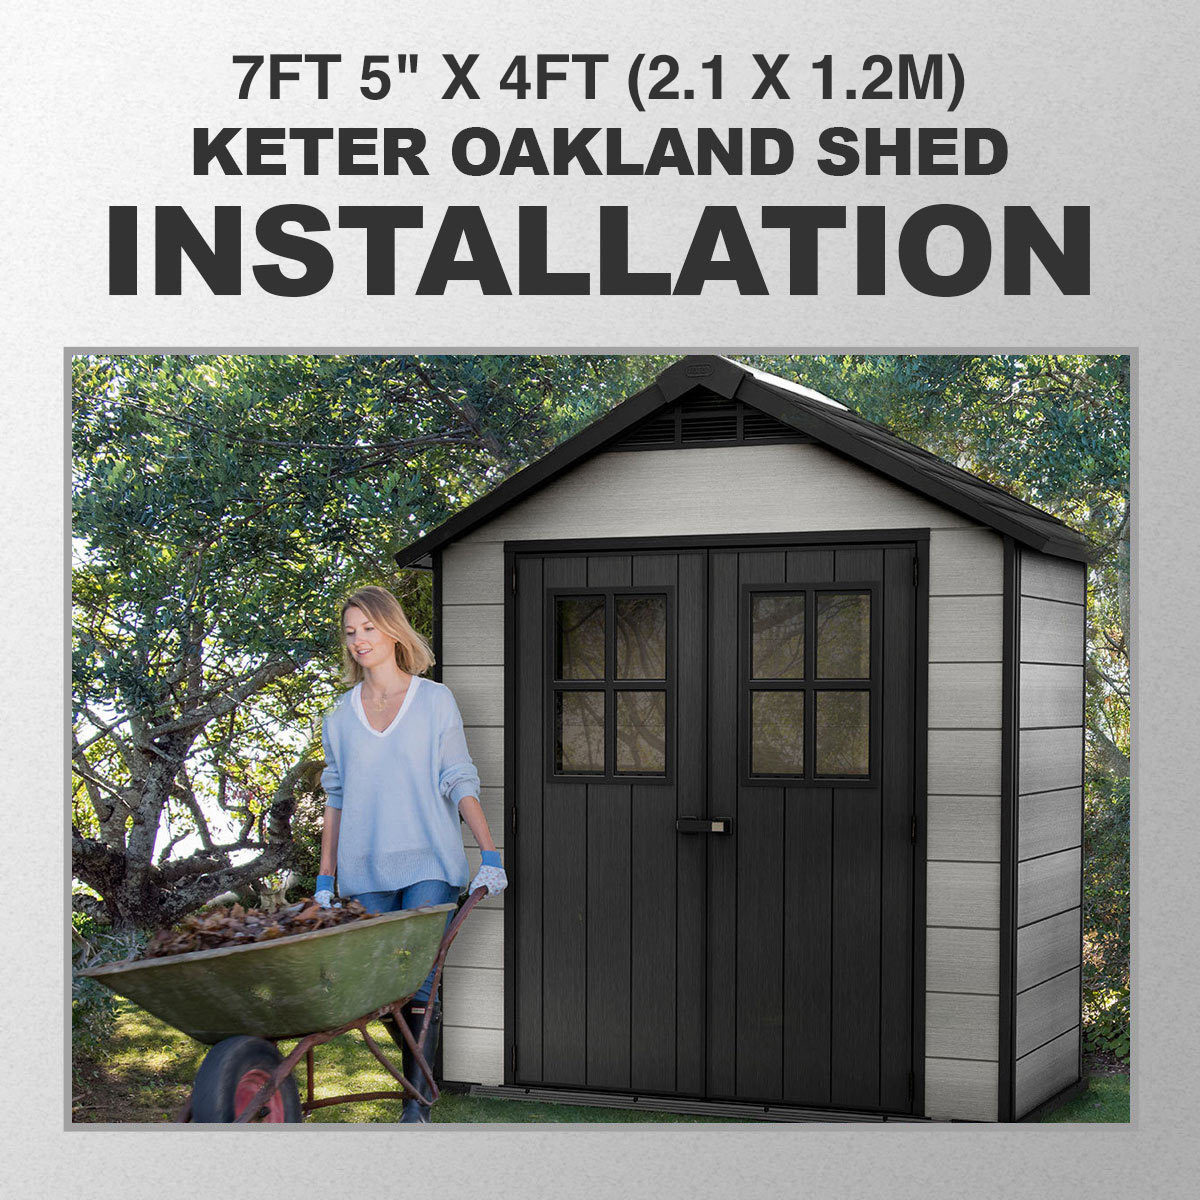 Installation for Keter Oakland 7ft 5" x 4ft (2.1 x 1.2m) Shed